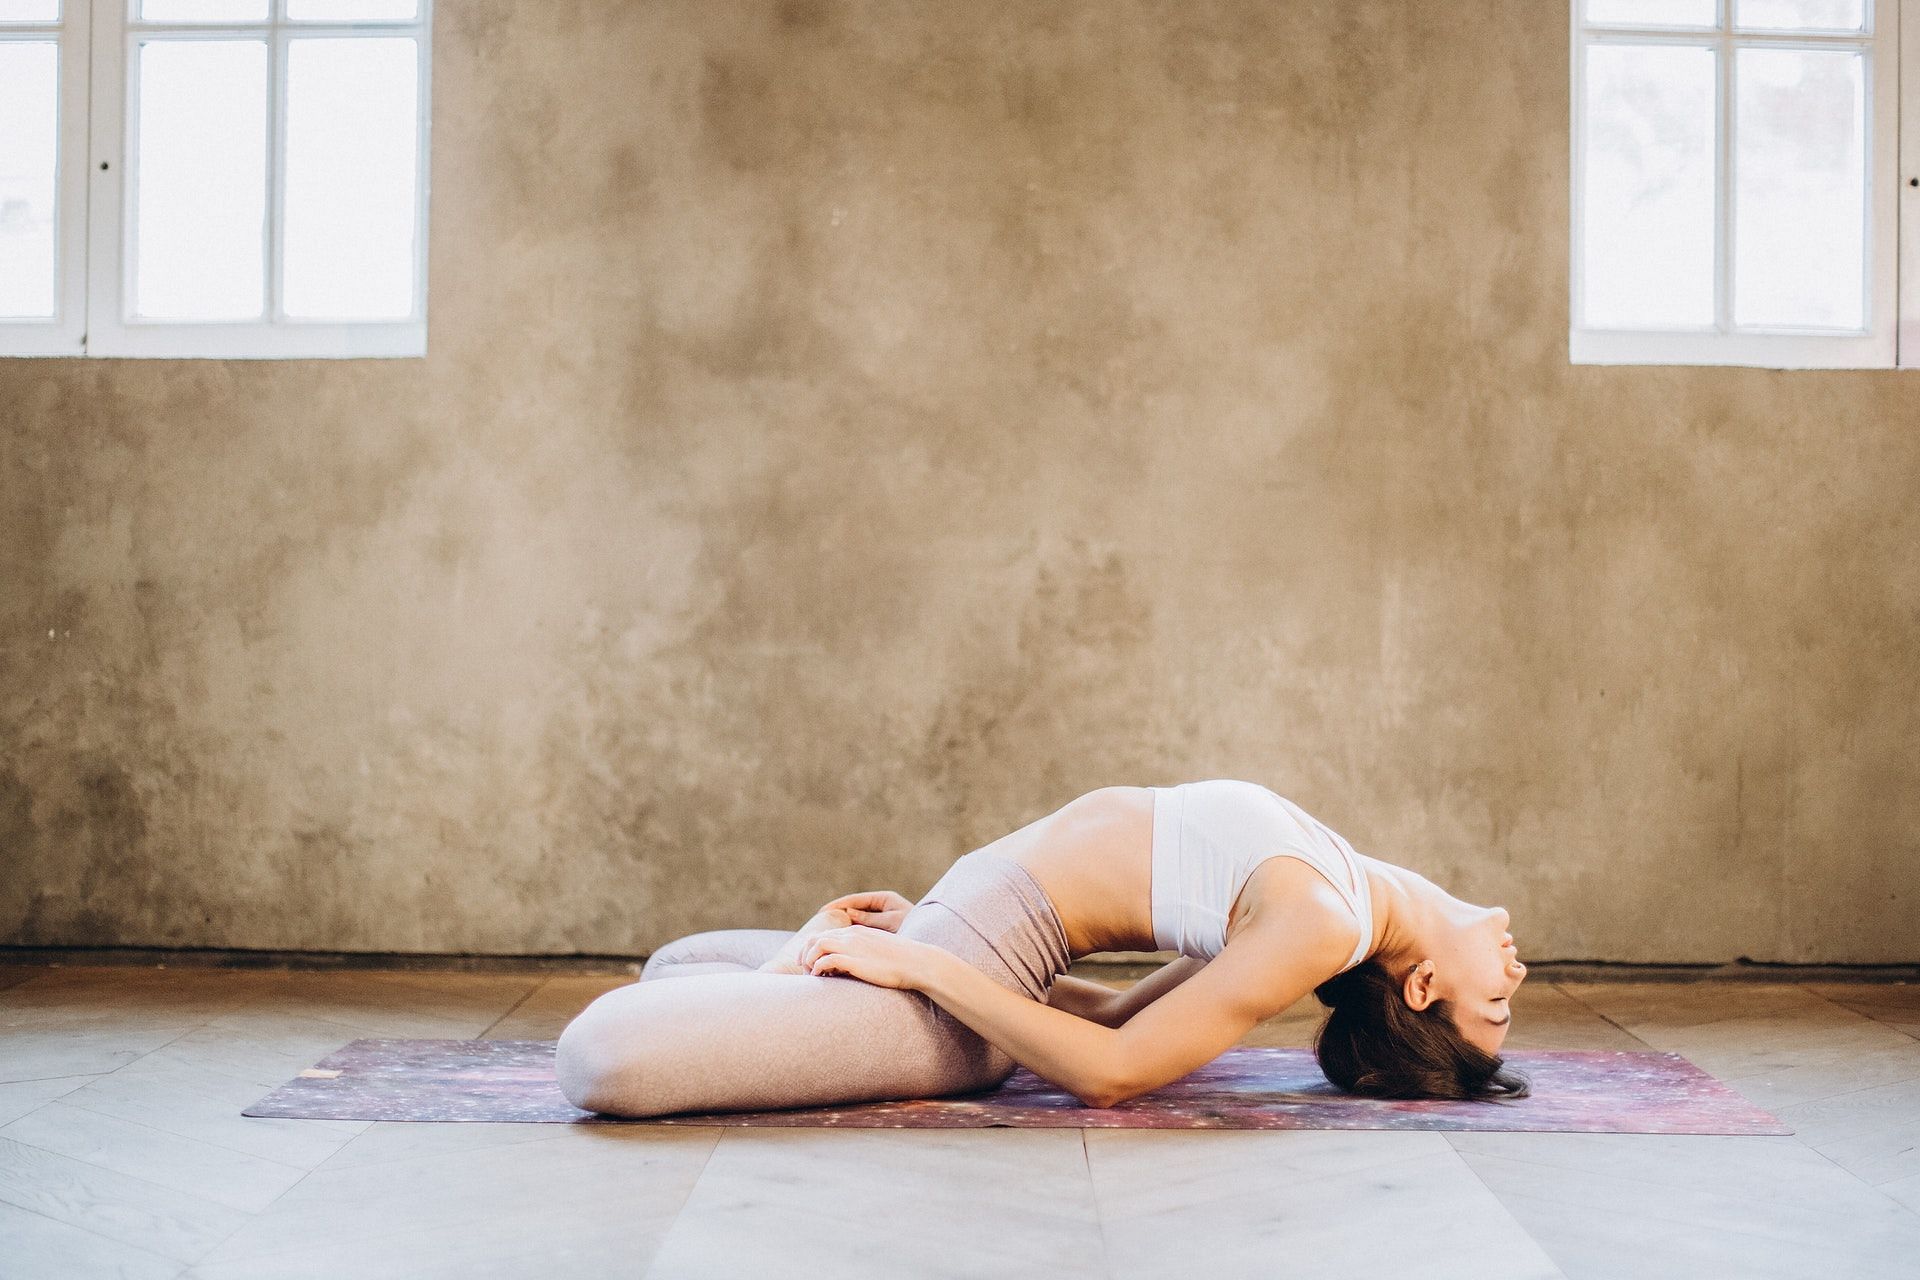 Regular iliopsoas stretches can improve your strength and mobility. (Photo by Elina Fairytale via pexels)